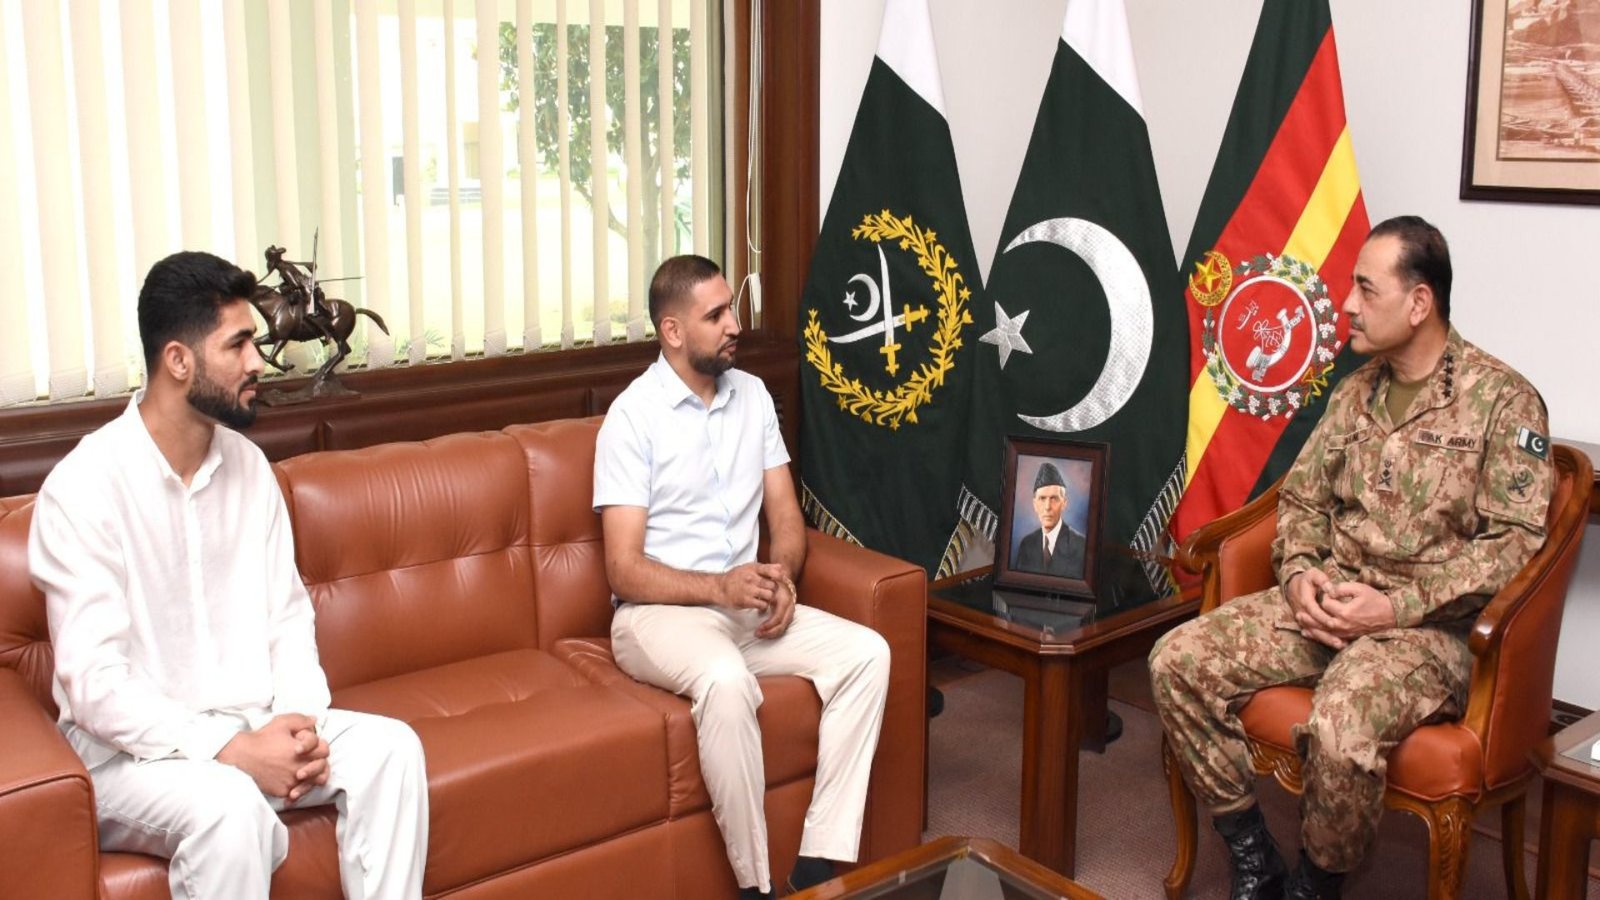 COAS meets Shahzaib Rind who defeated India in Karate Combat